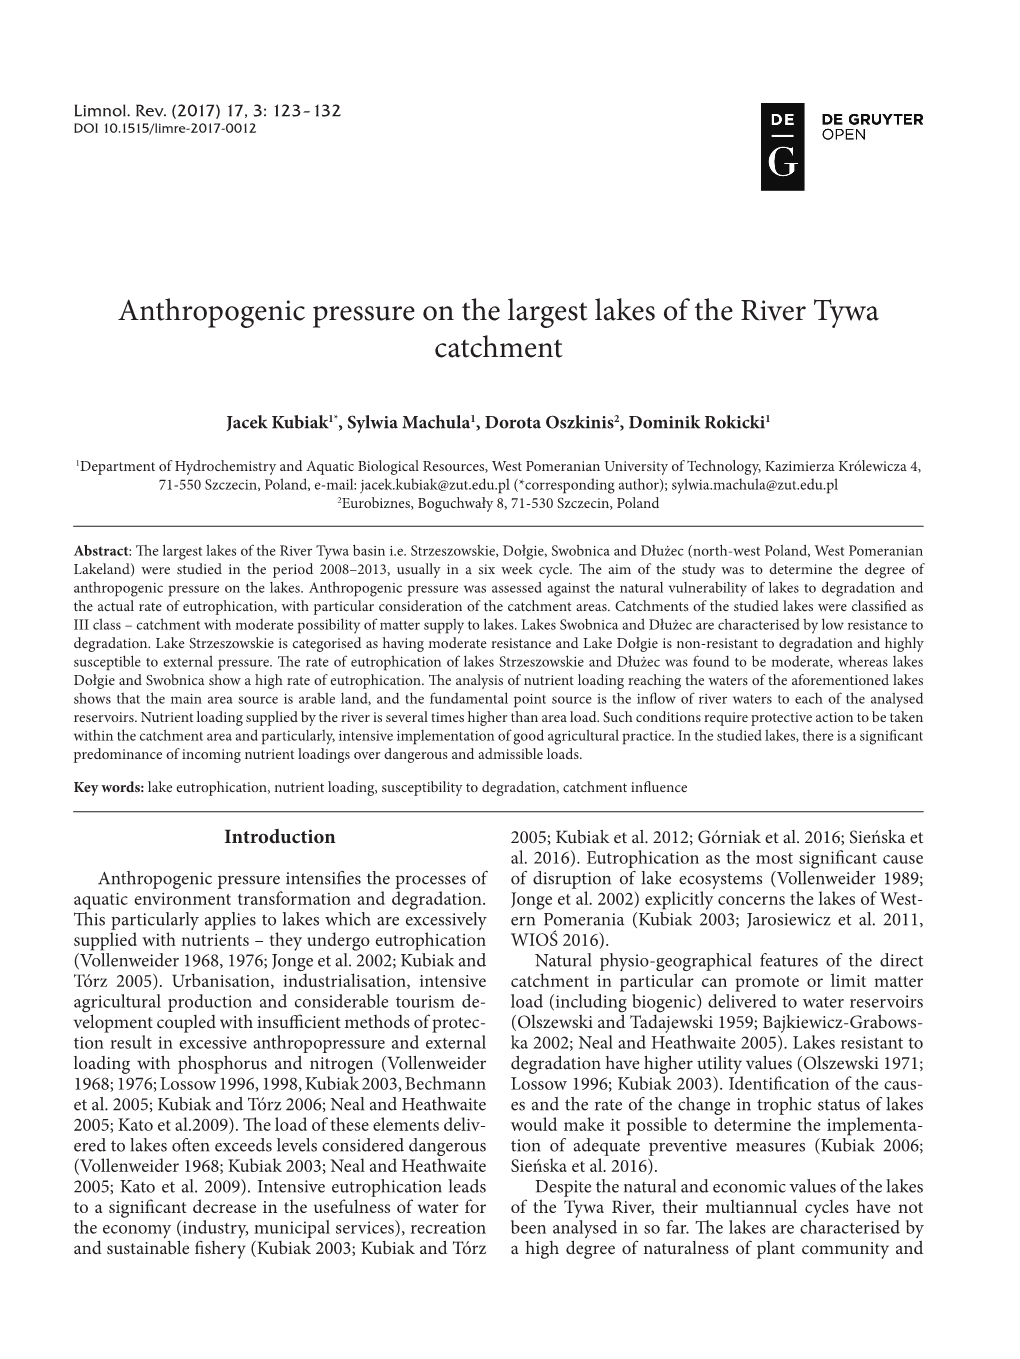 Anthropogenic Pressure on the Largest Lakes of the River Tywa Catchment